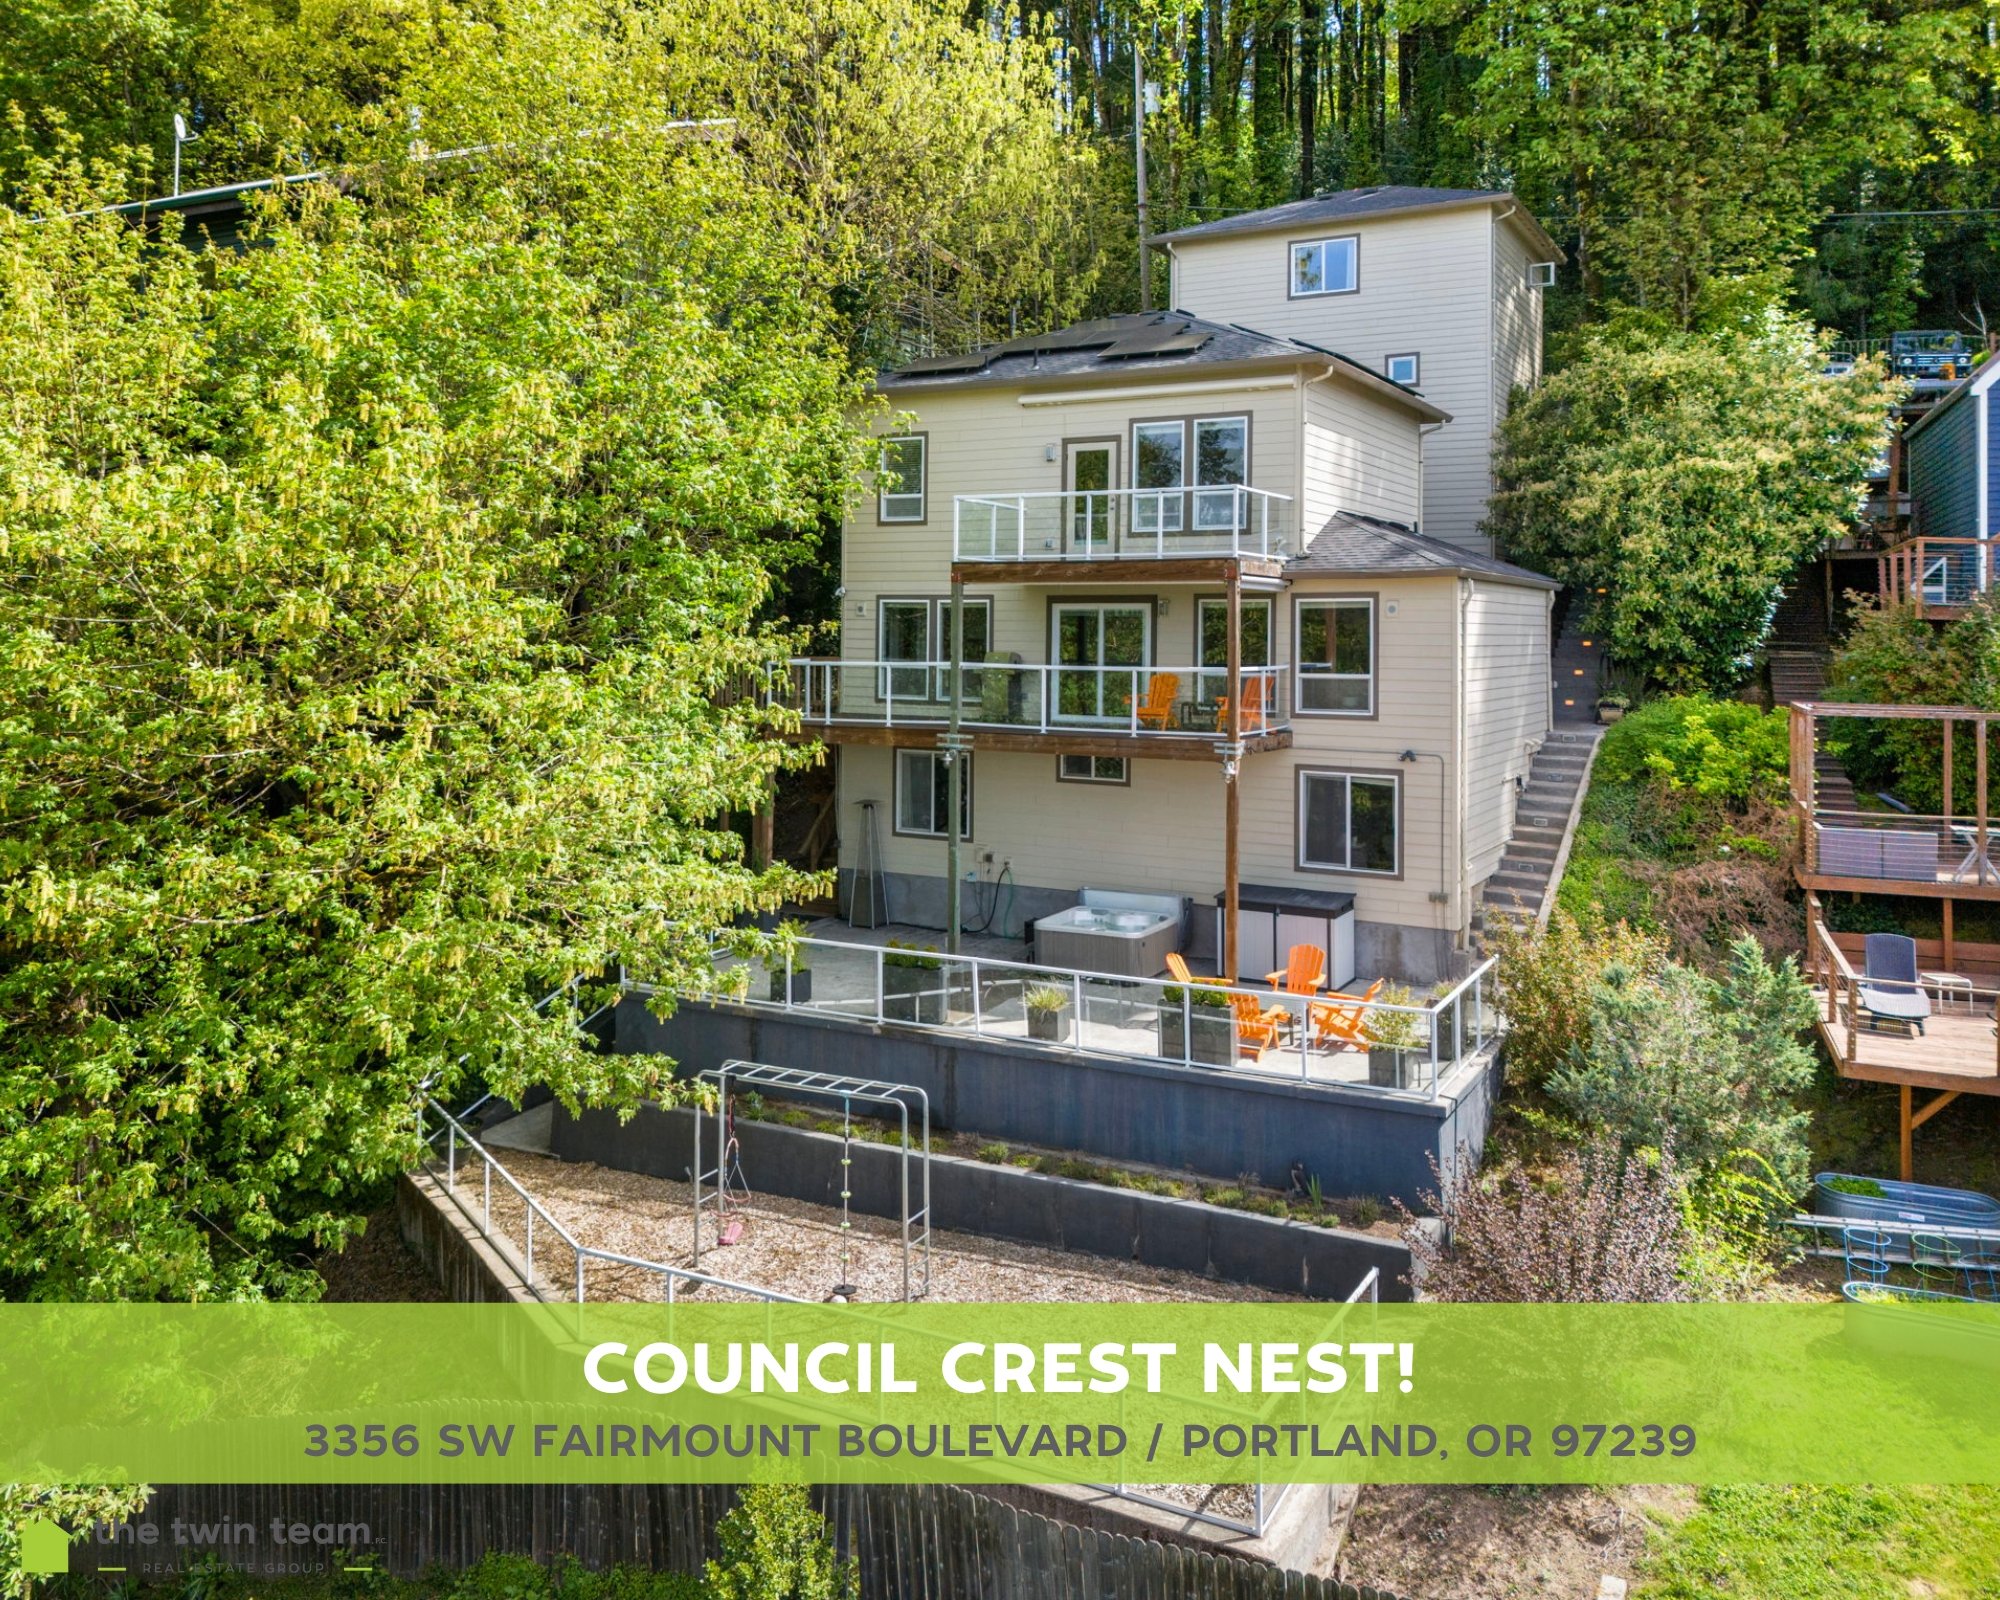 JUST LISTED!!
📍3356 SW Fairmount Blvd, Portland, OR 97239
🛏 4 Beds
🛁 4 Baths
📐 2856 Sq Ft
💰 $925,000

The views are the best in this Council Crest nest! Enjoy private multi-level living with territorial views from every room! Open living and din